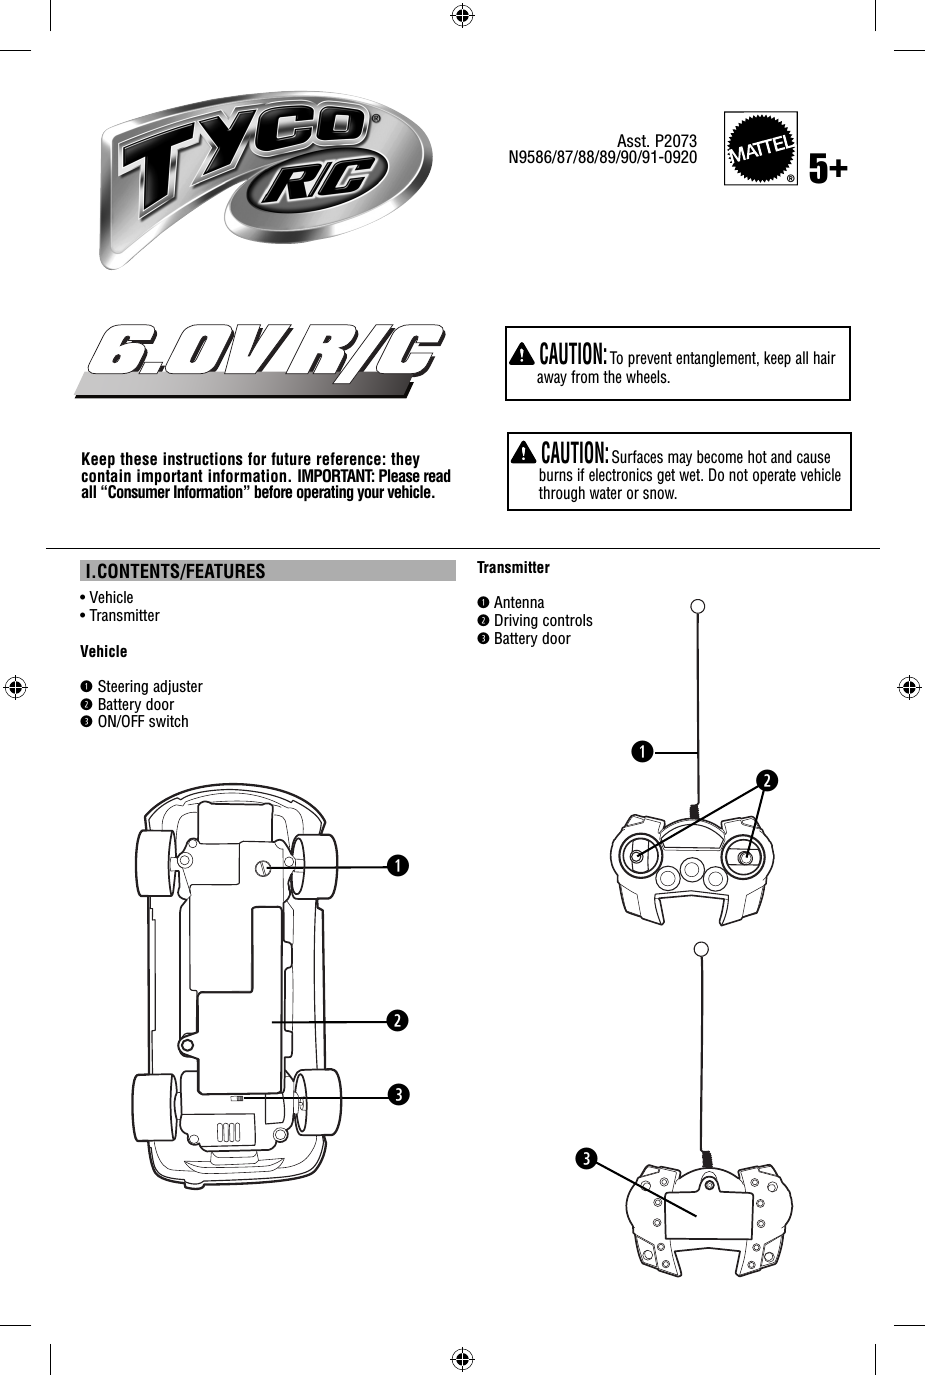  I.CONTENTS/FEATURES•  Vehicle • TransmitterVehicleq  Steering adjusterw Battery doore ON/OFF switchKeep these instructions for future reference: they contain important information. IMPORTANT: Please read all “Consumer Information” before operating your vehicle.Asst. P2073N9586/87/88/89/90/91-0920Transmitterq Antennaw Driving controlse Battery doorqw®5+eqew CAUTION: Surfaces may become hot and cause burns if electronics get wet. Do not operate vehicle through water or snow. CAUTION: To prevent entanglement, keep all hair away from the wheels.